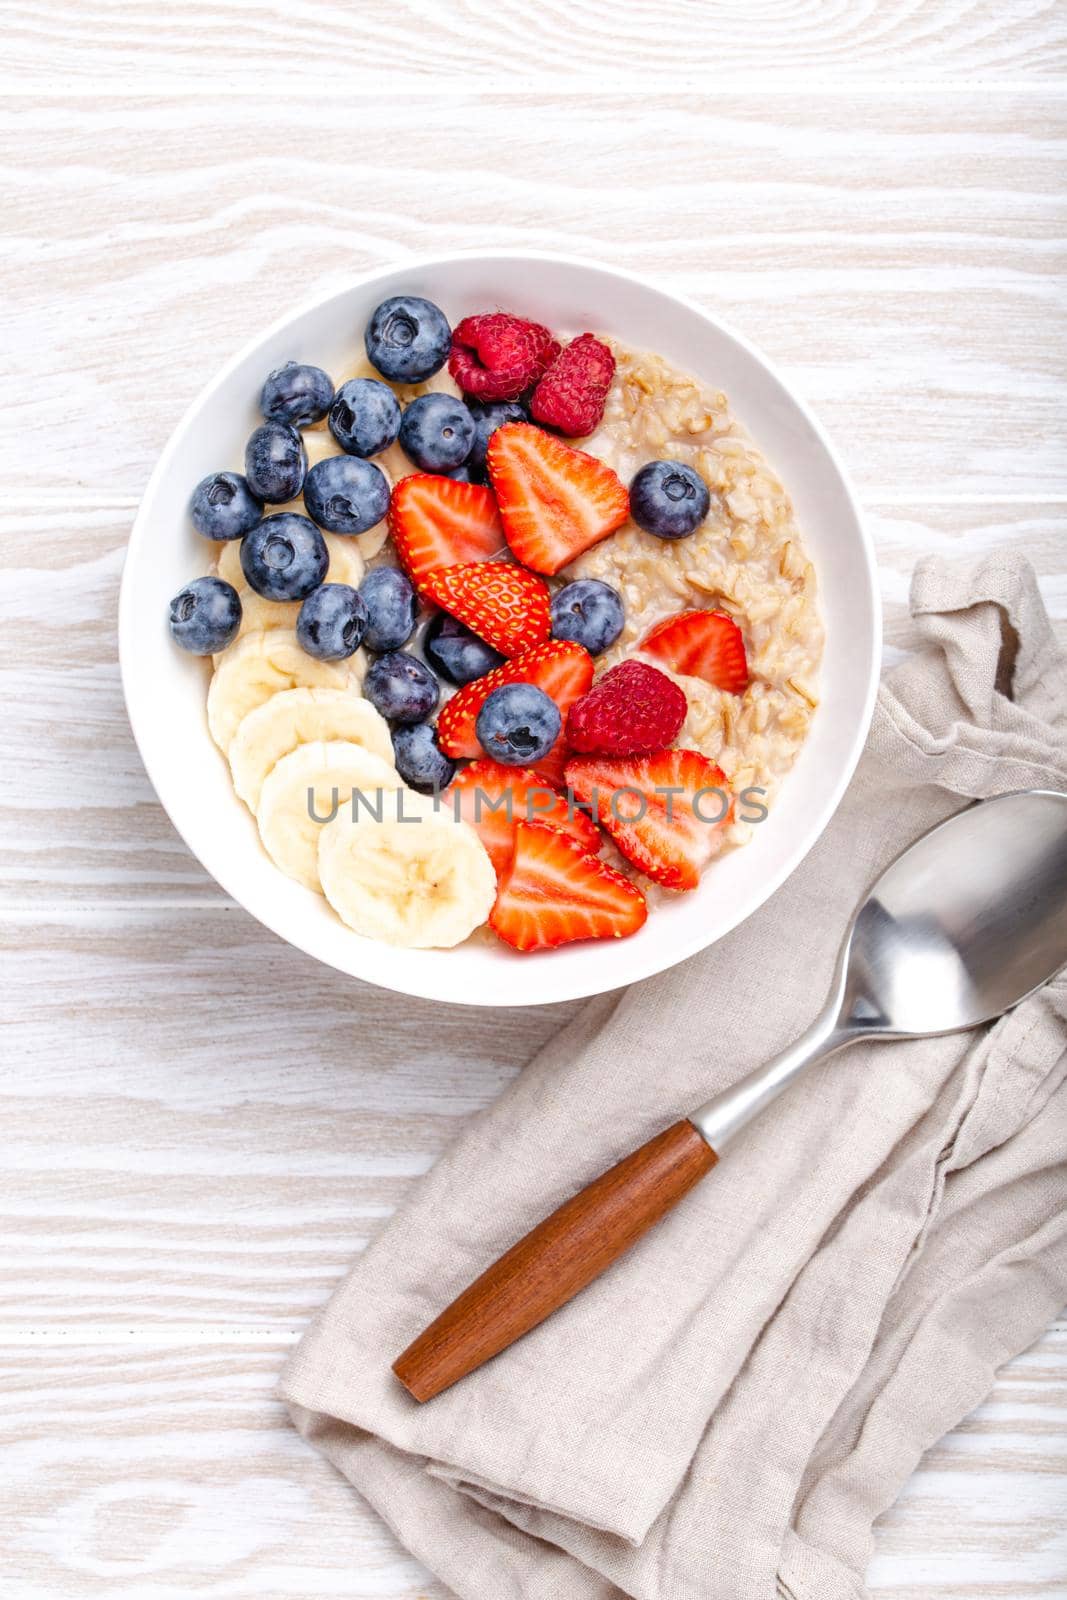 Oatmeal porridge with fruit and berries in bowl with spoon on white wooden background table top view, homemade healthy breakfast cereal with strawberry, banana, blueberry, raspberry. Space for text